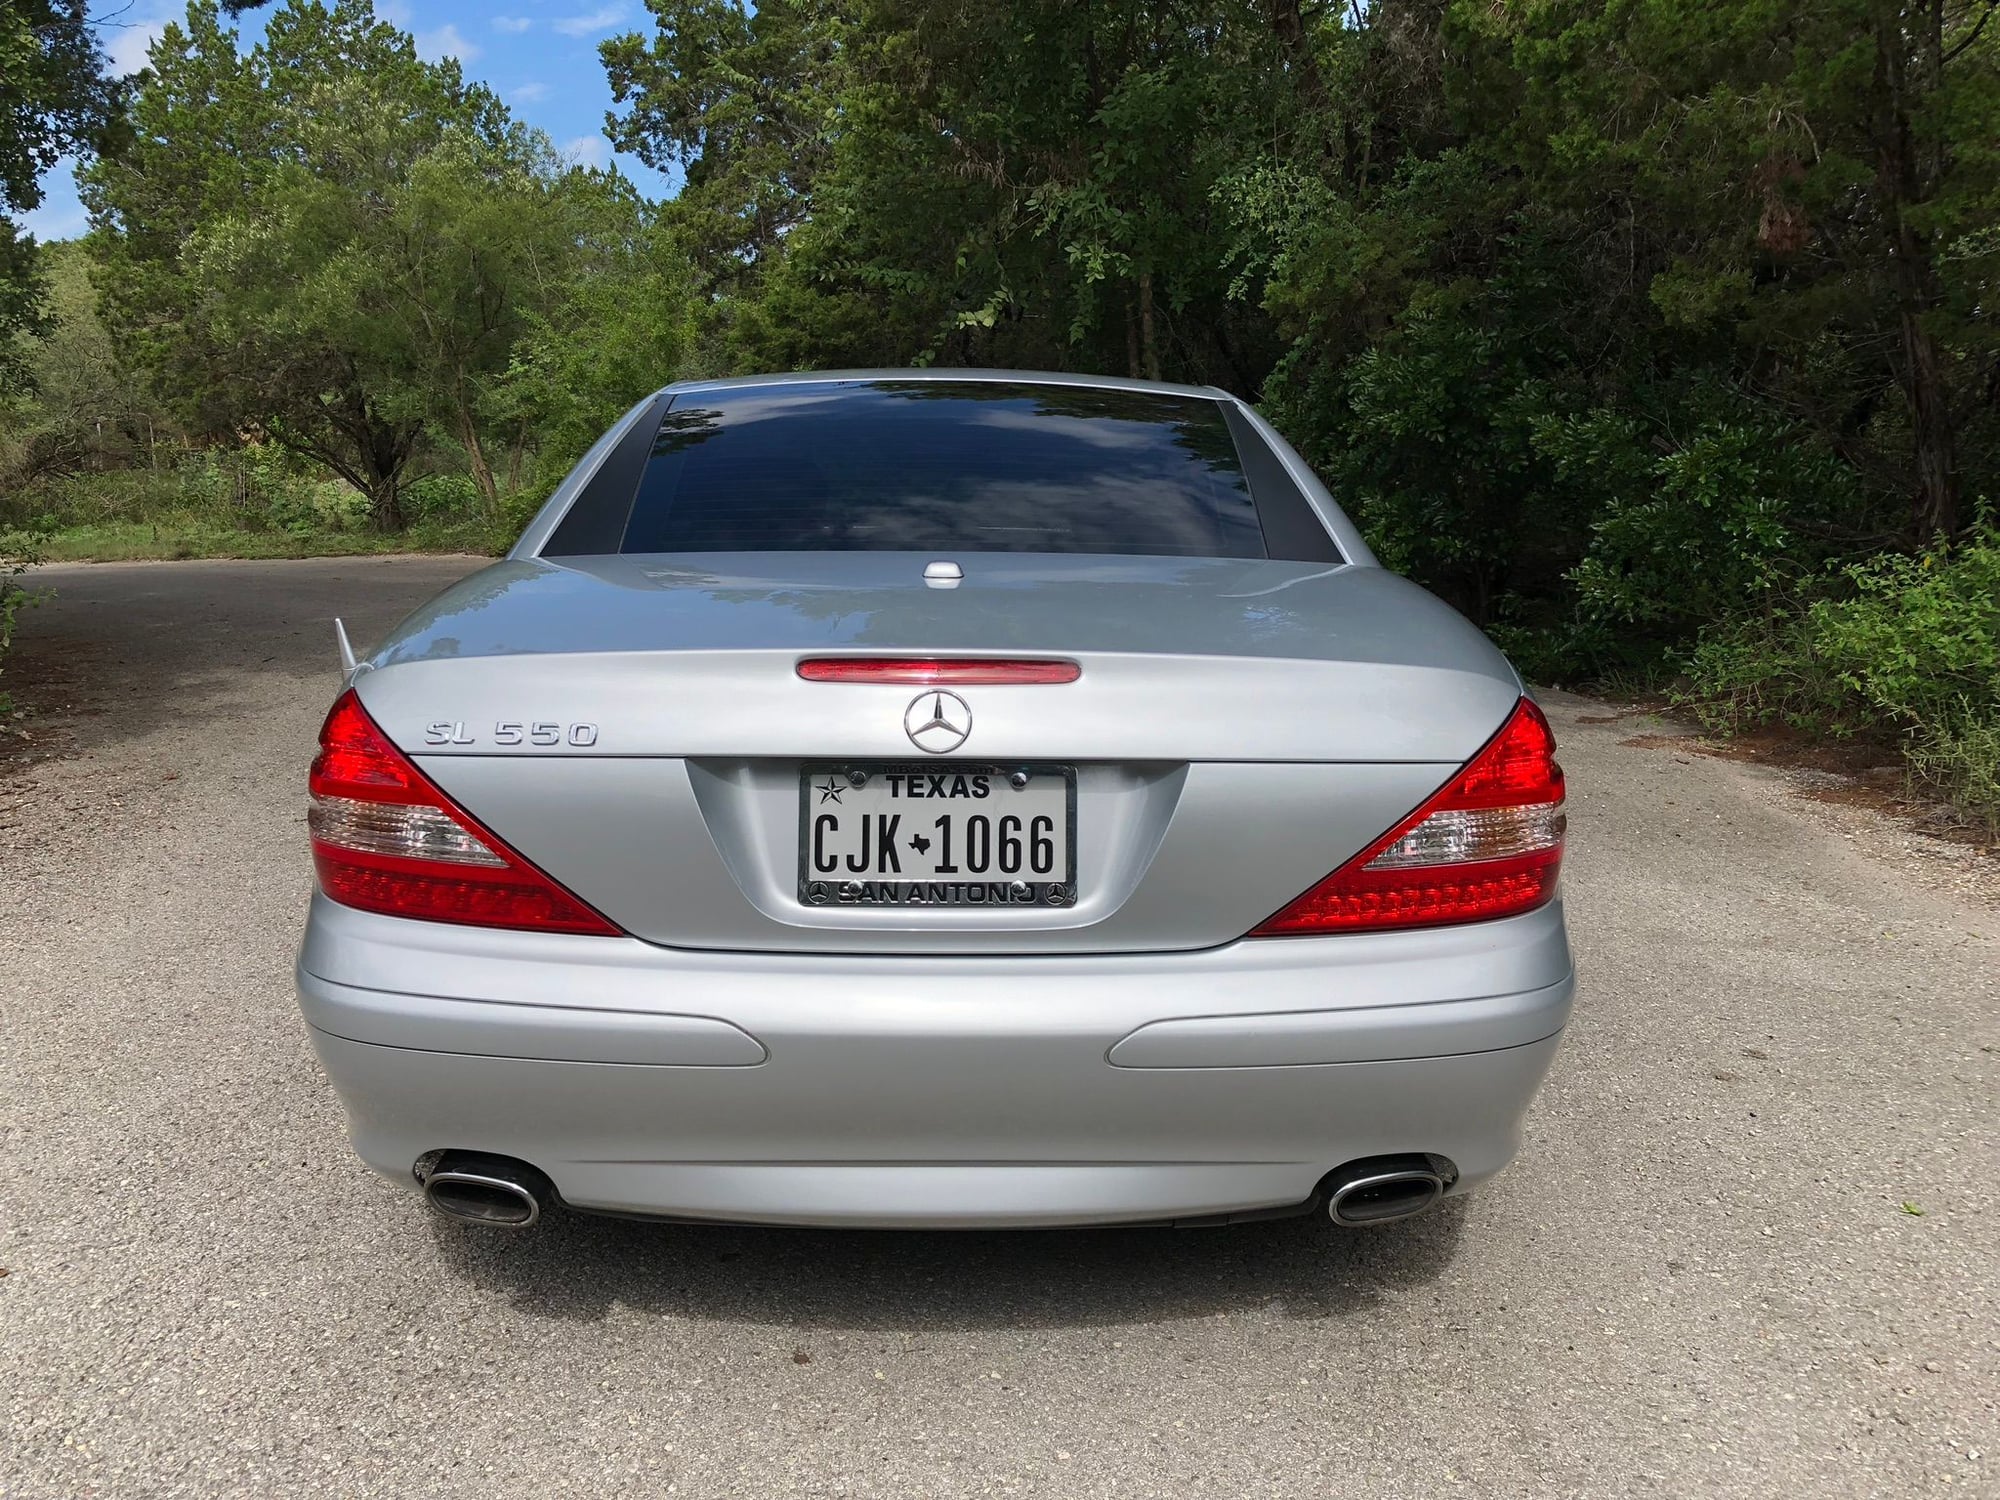 2007 Mercedes-Benz SL550 - Stunning 2007 Mercedes Benz SL 550 for sale - Used - VIN WDBSK71F87F124344 - 42,875 Miles - 8 cyl - 2WD - Automatic - Convertible - Silver - New Braunfels, TX 78130, United States